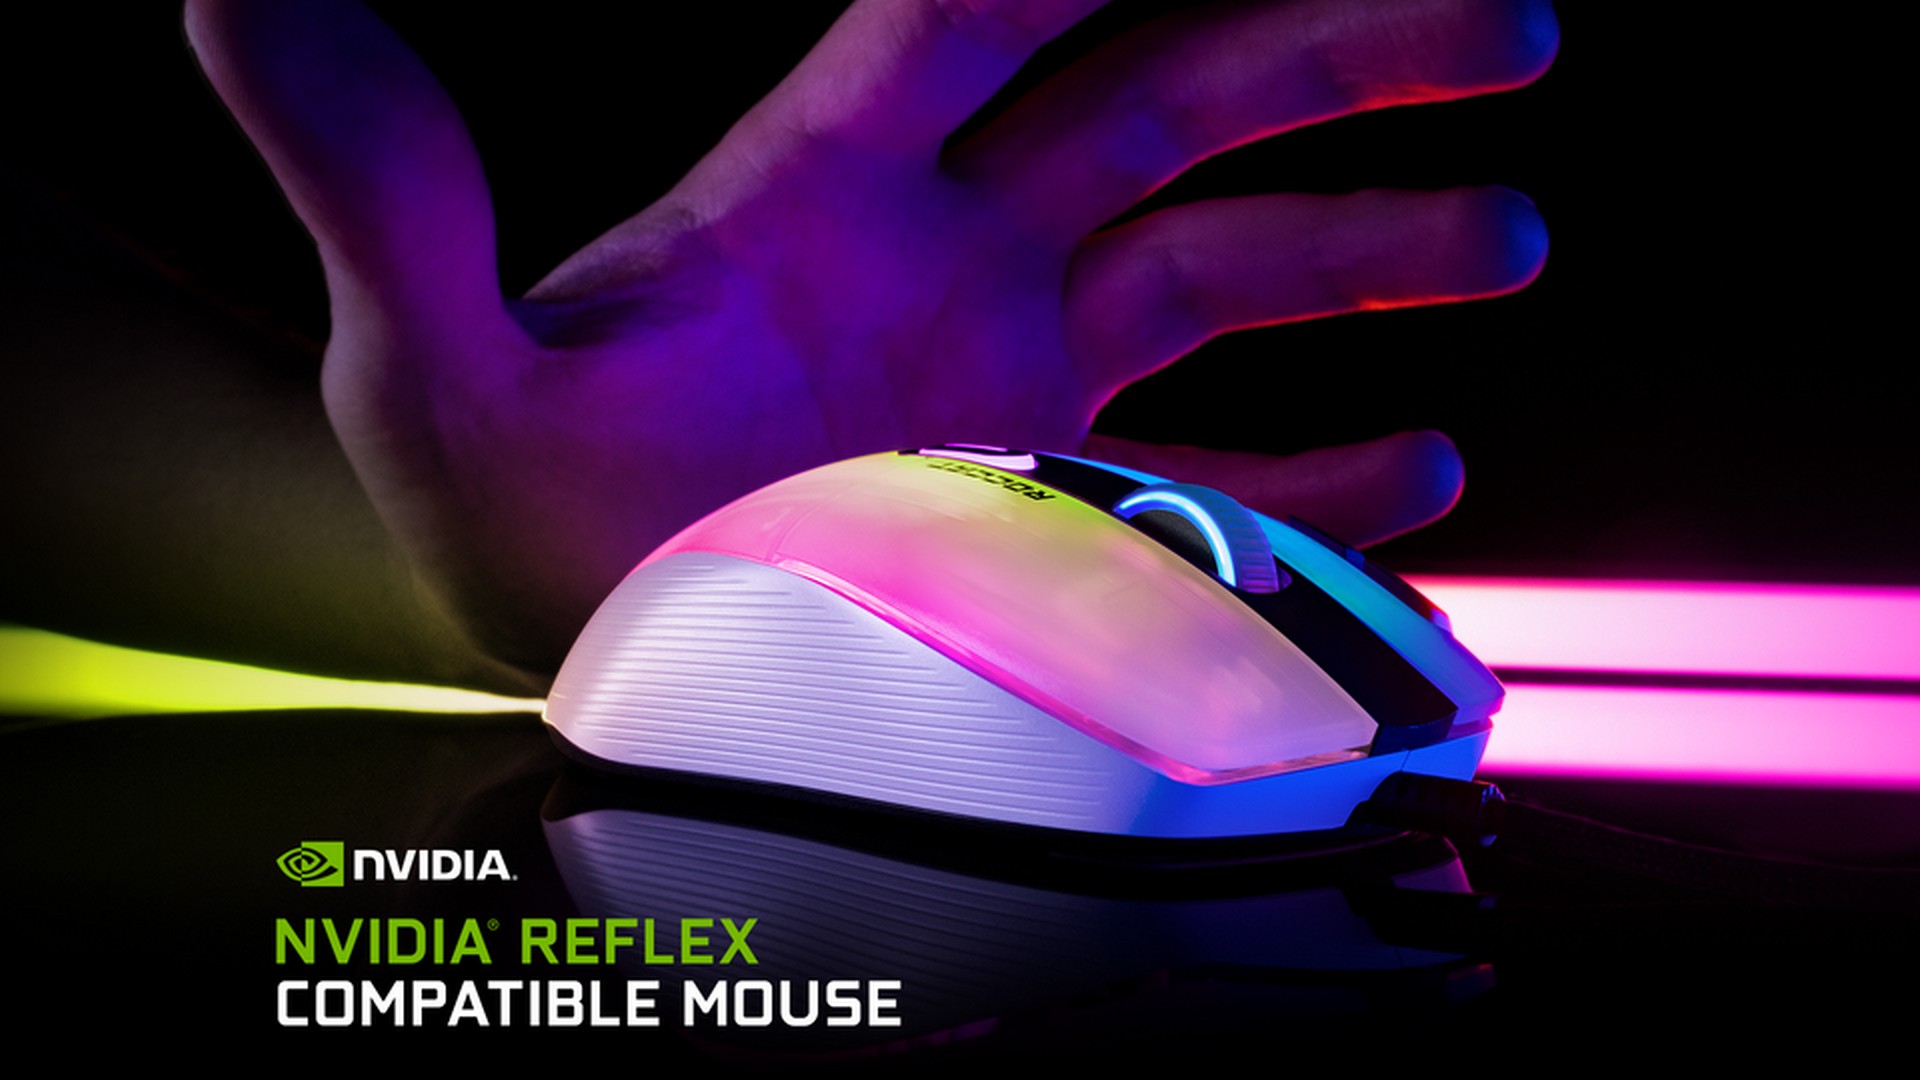 Roccat’s KONE XP Gaming Mouse Among Select Products Supporting Nvidia Reflex Analyzer